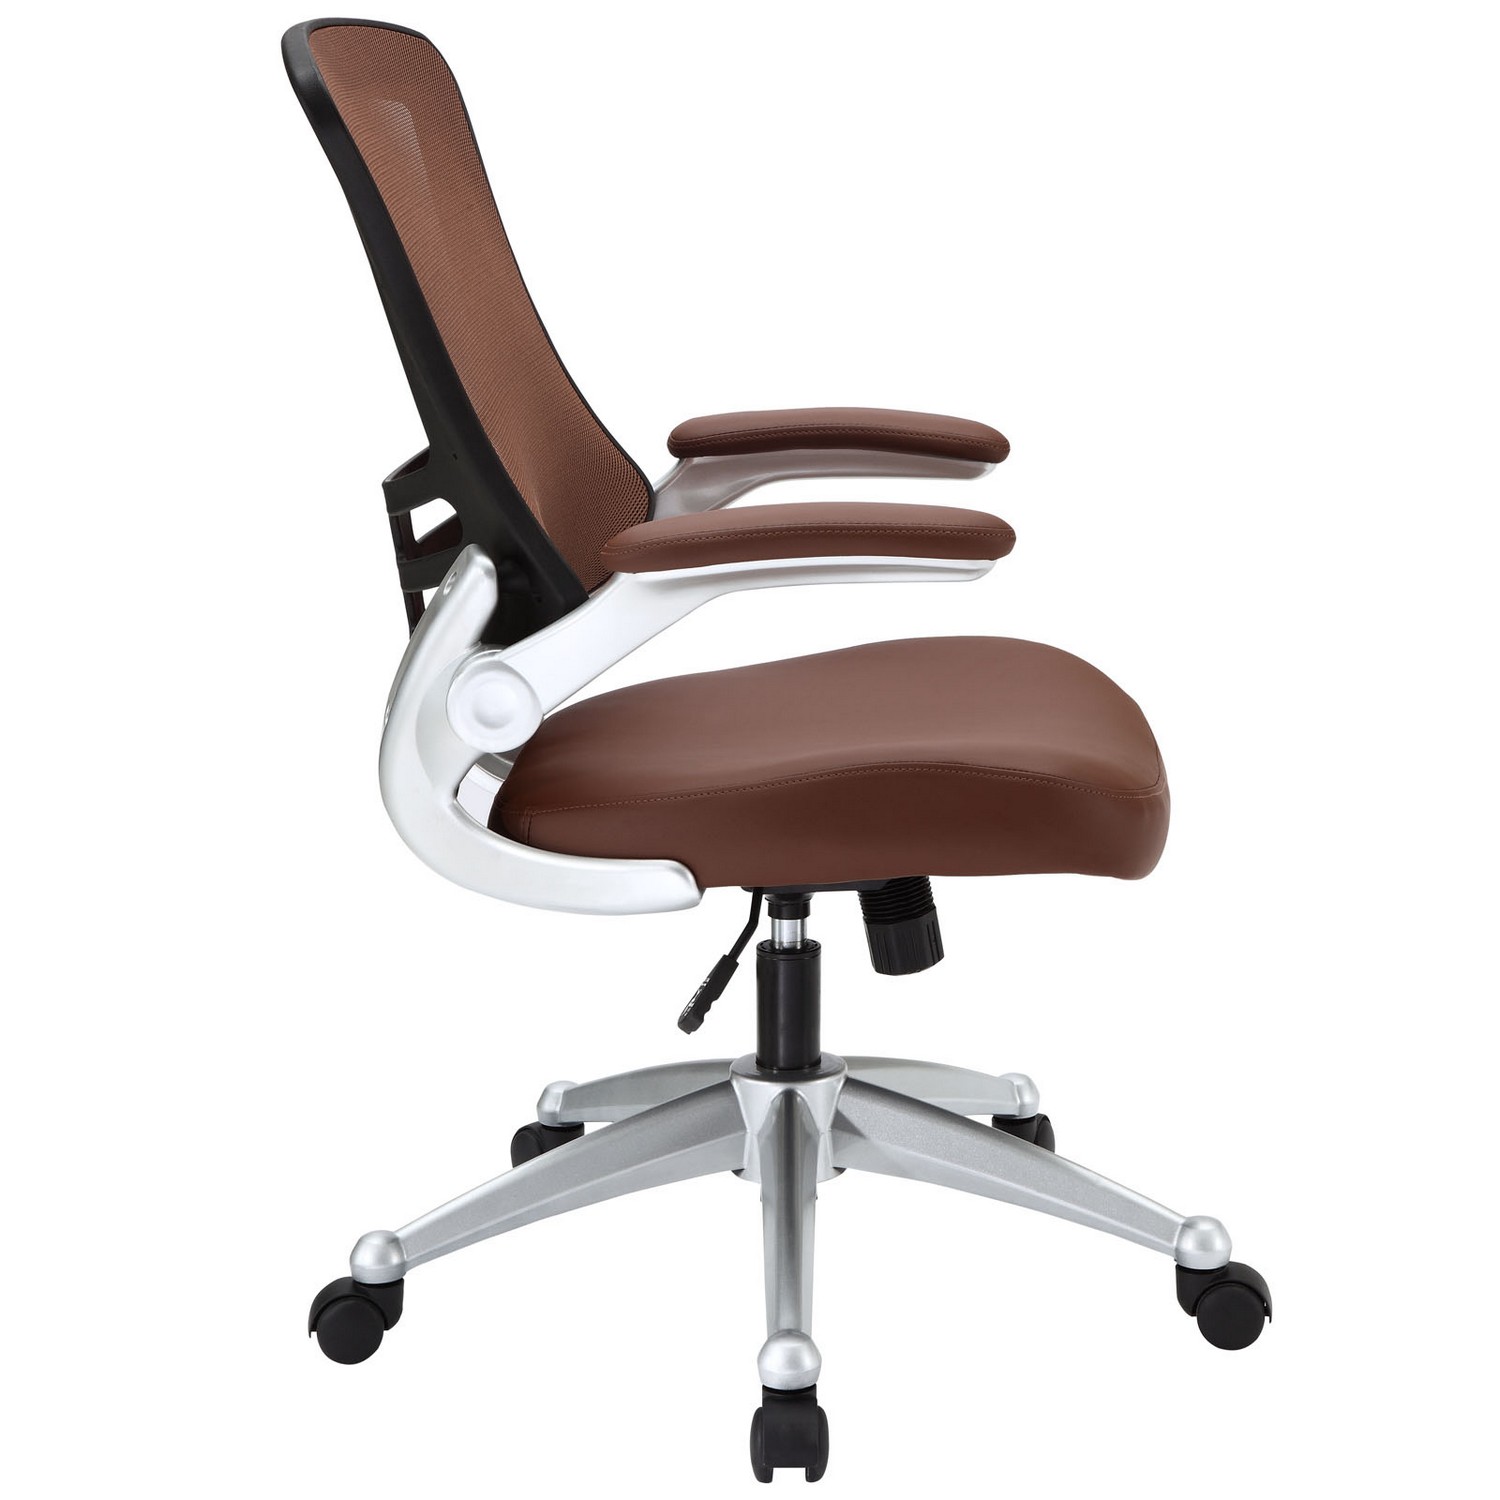 Modway Attainment Office Chair - Tan